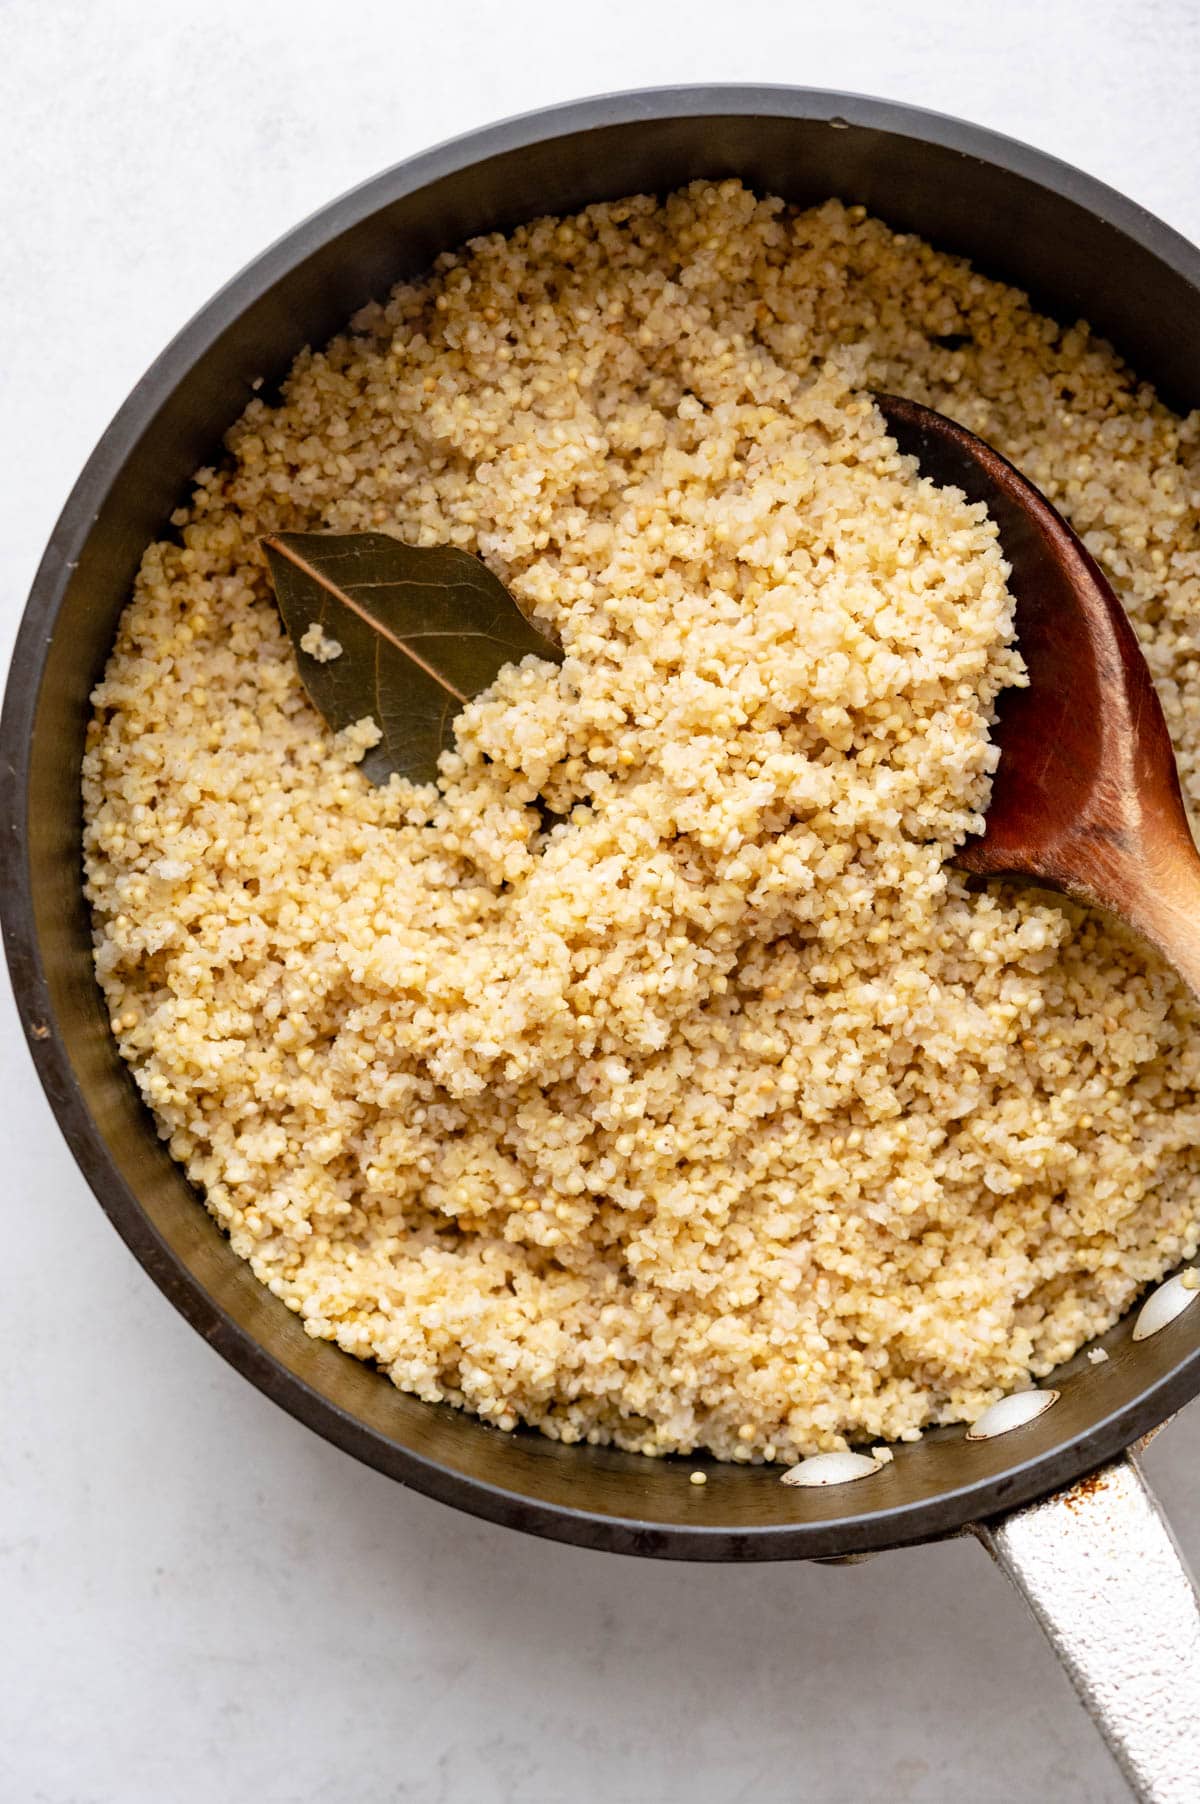 Fluffed, cooked millet in a pan.